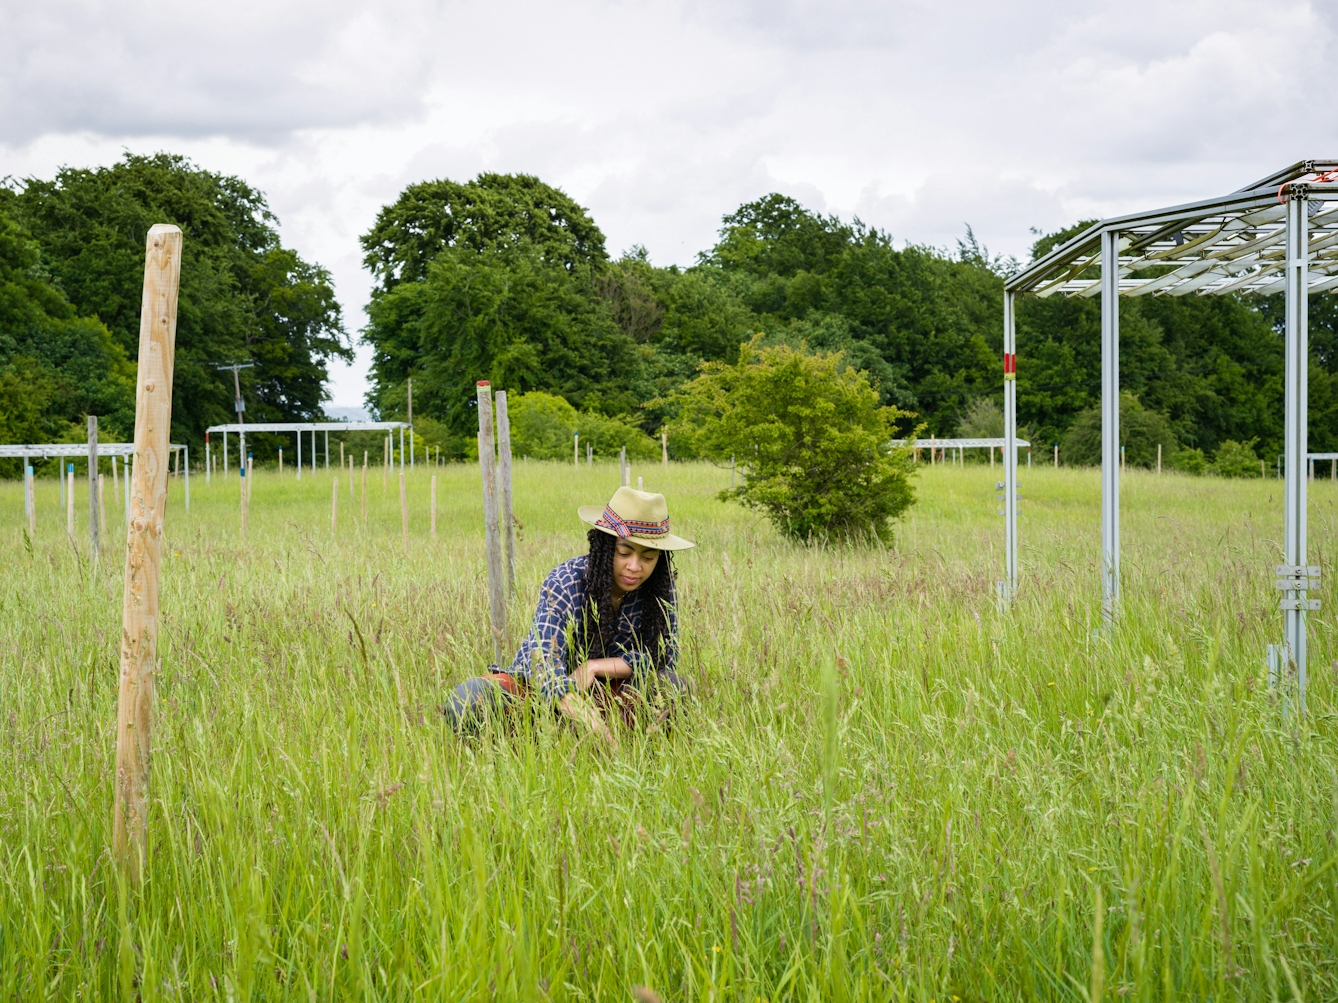 Colour photograph of a young woman wearing a brimmed hat and checked blue shirt crouching down in a wild grassland meadow. She is looking down into the grasses. Behind her  is a tree lined border with a series of man made metal and wooden framed structures.